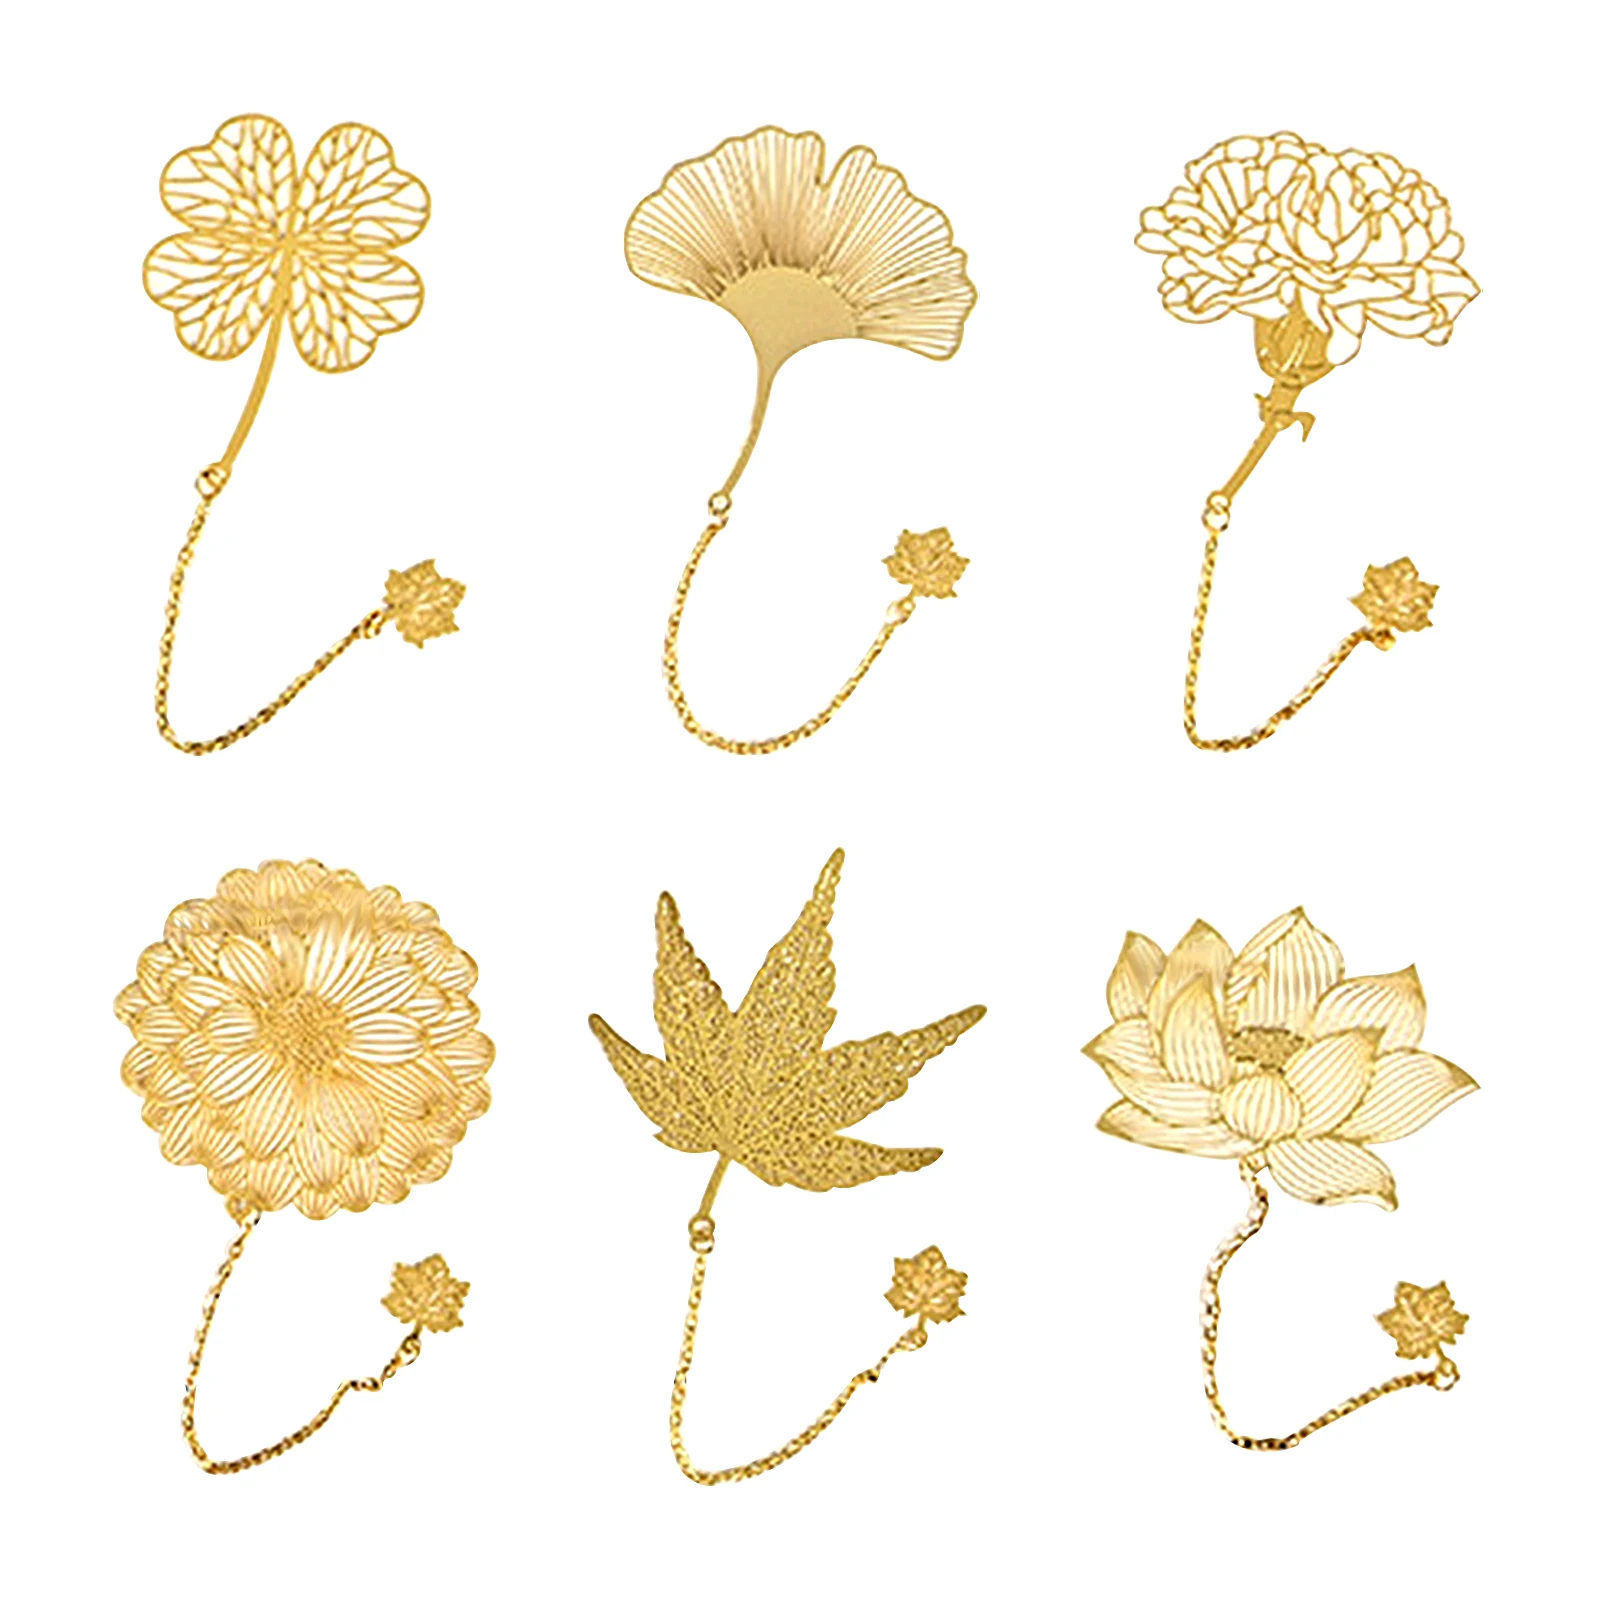 

6pcs Chinese Reading Metal Bookmark For Book Lovers Maple Leaf With Chain Elegant Brass Ginkgo Retro Men Women Lotus Hollow Gift